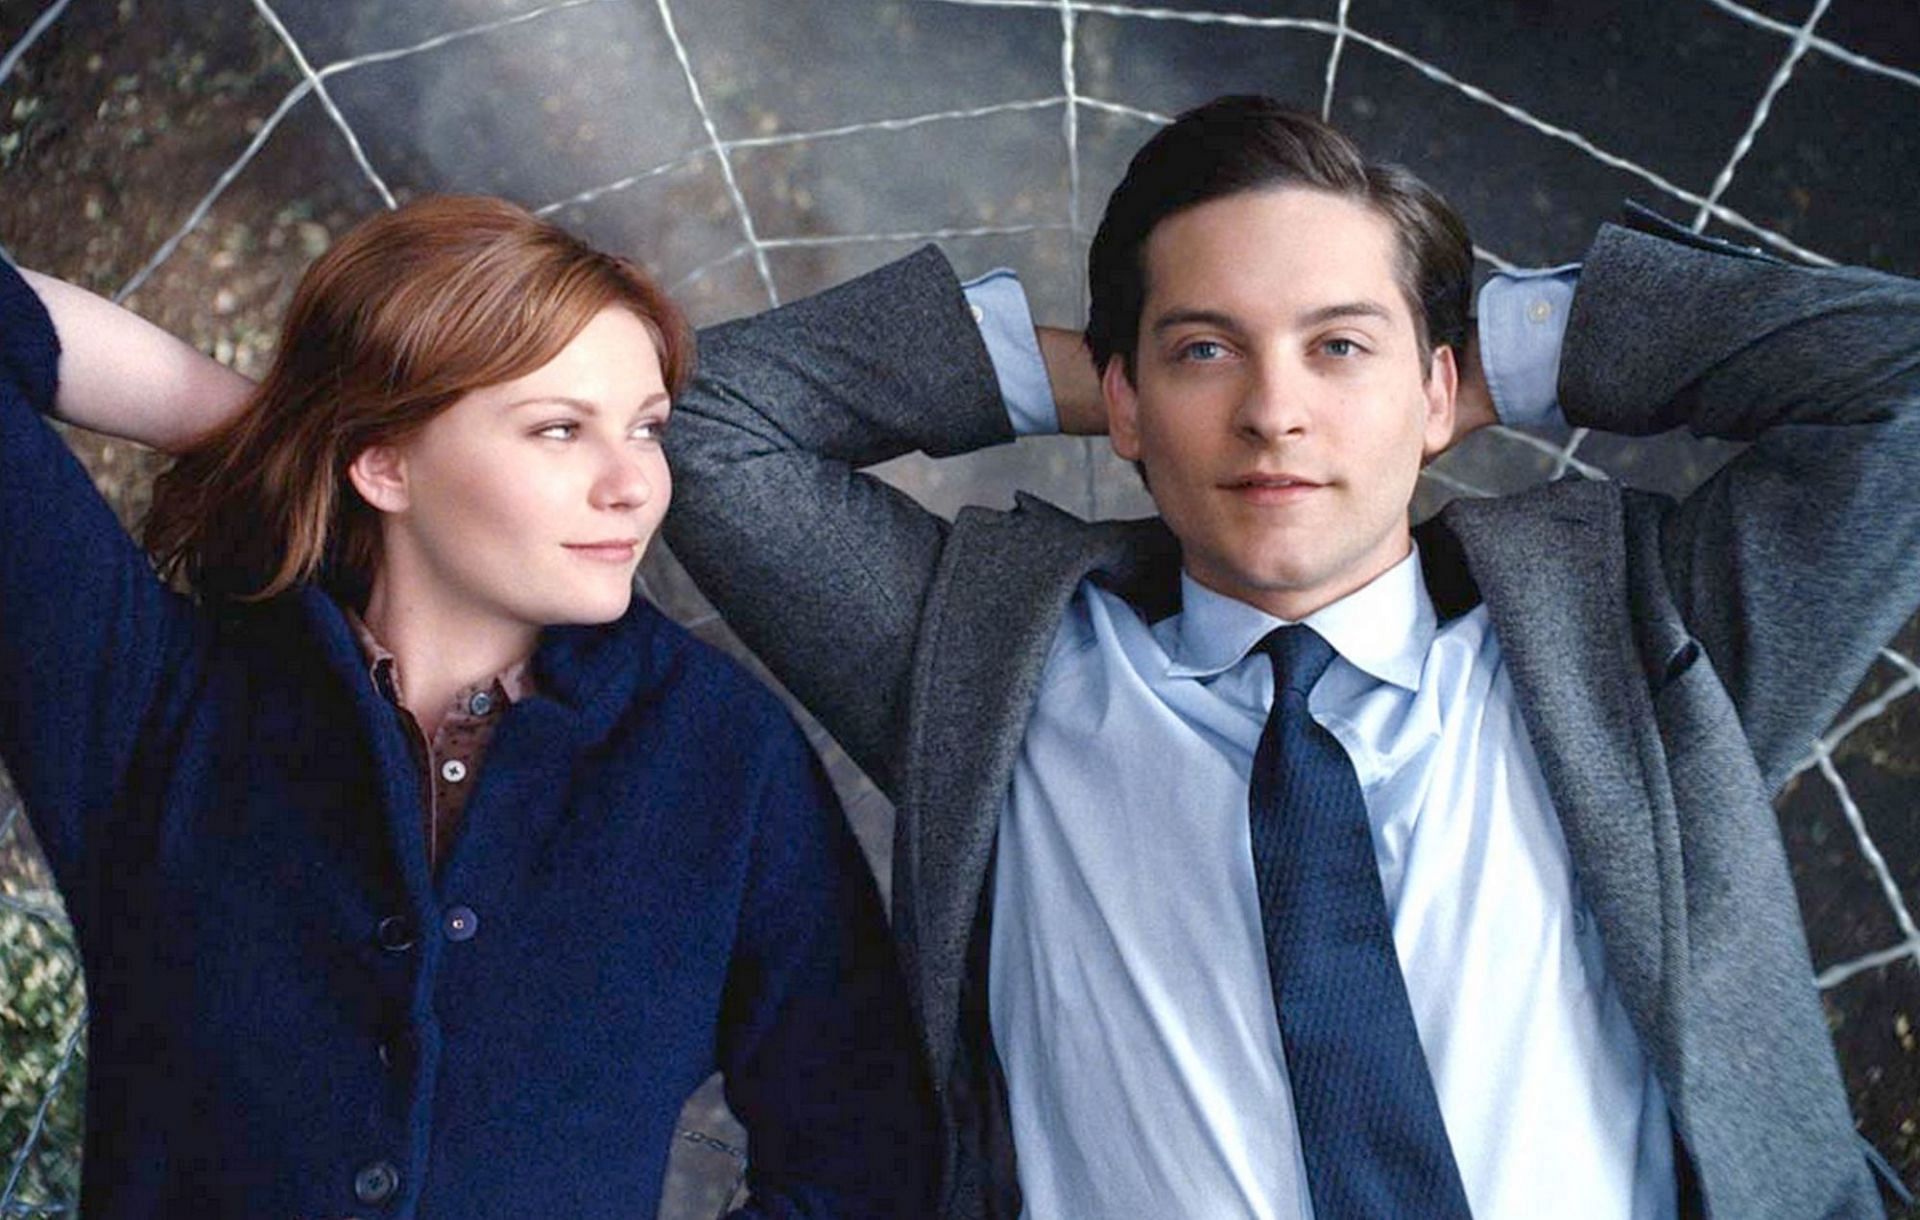 Kirsten Dunst and Tobey Maguire in Spider-Man 3 (Image via Sony)